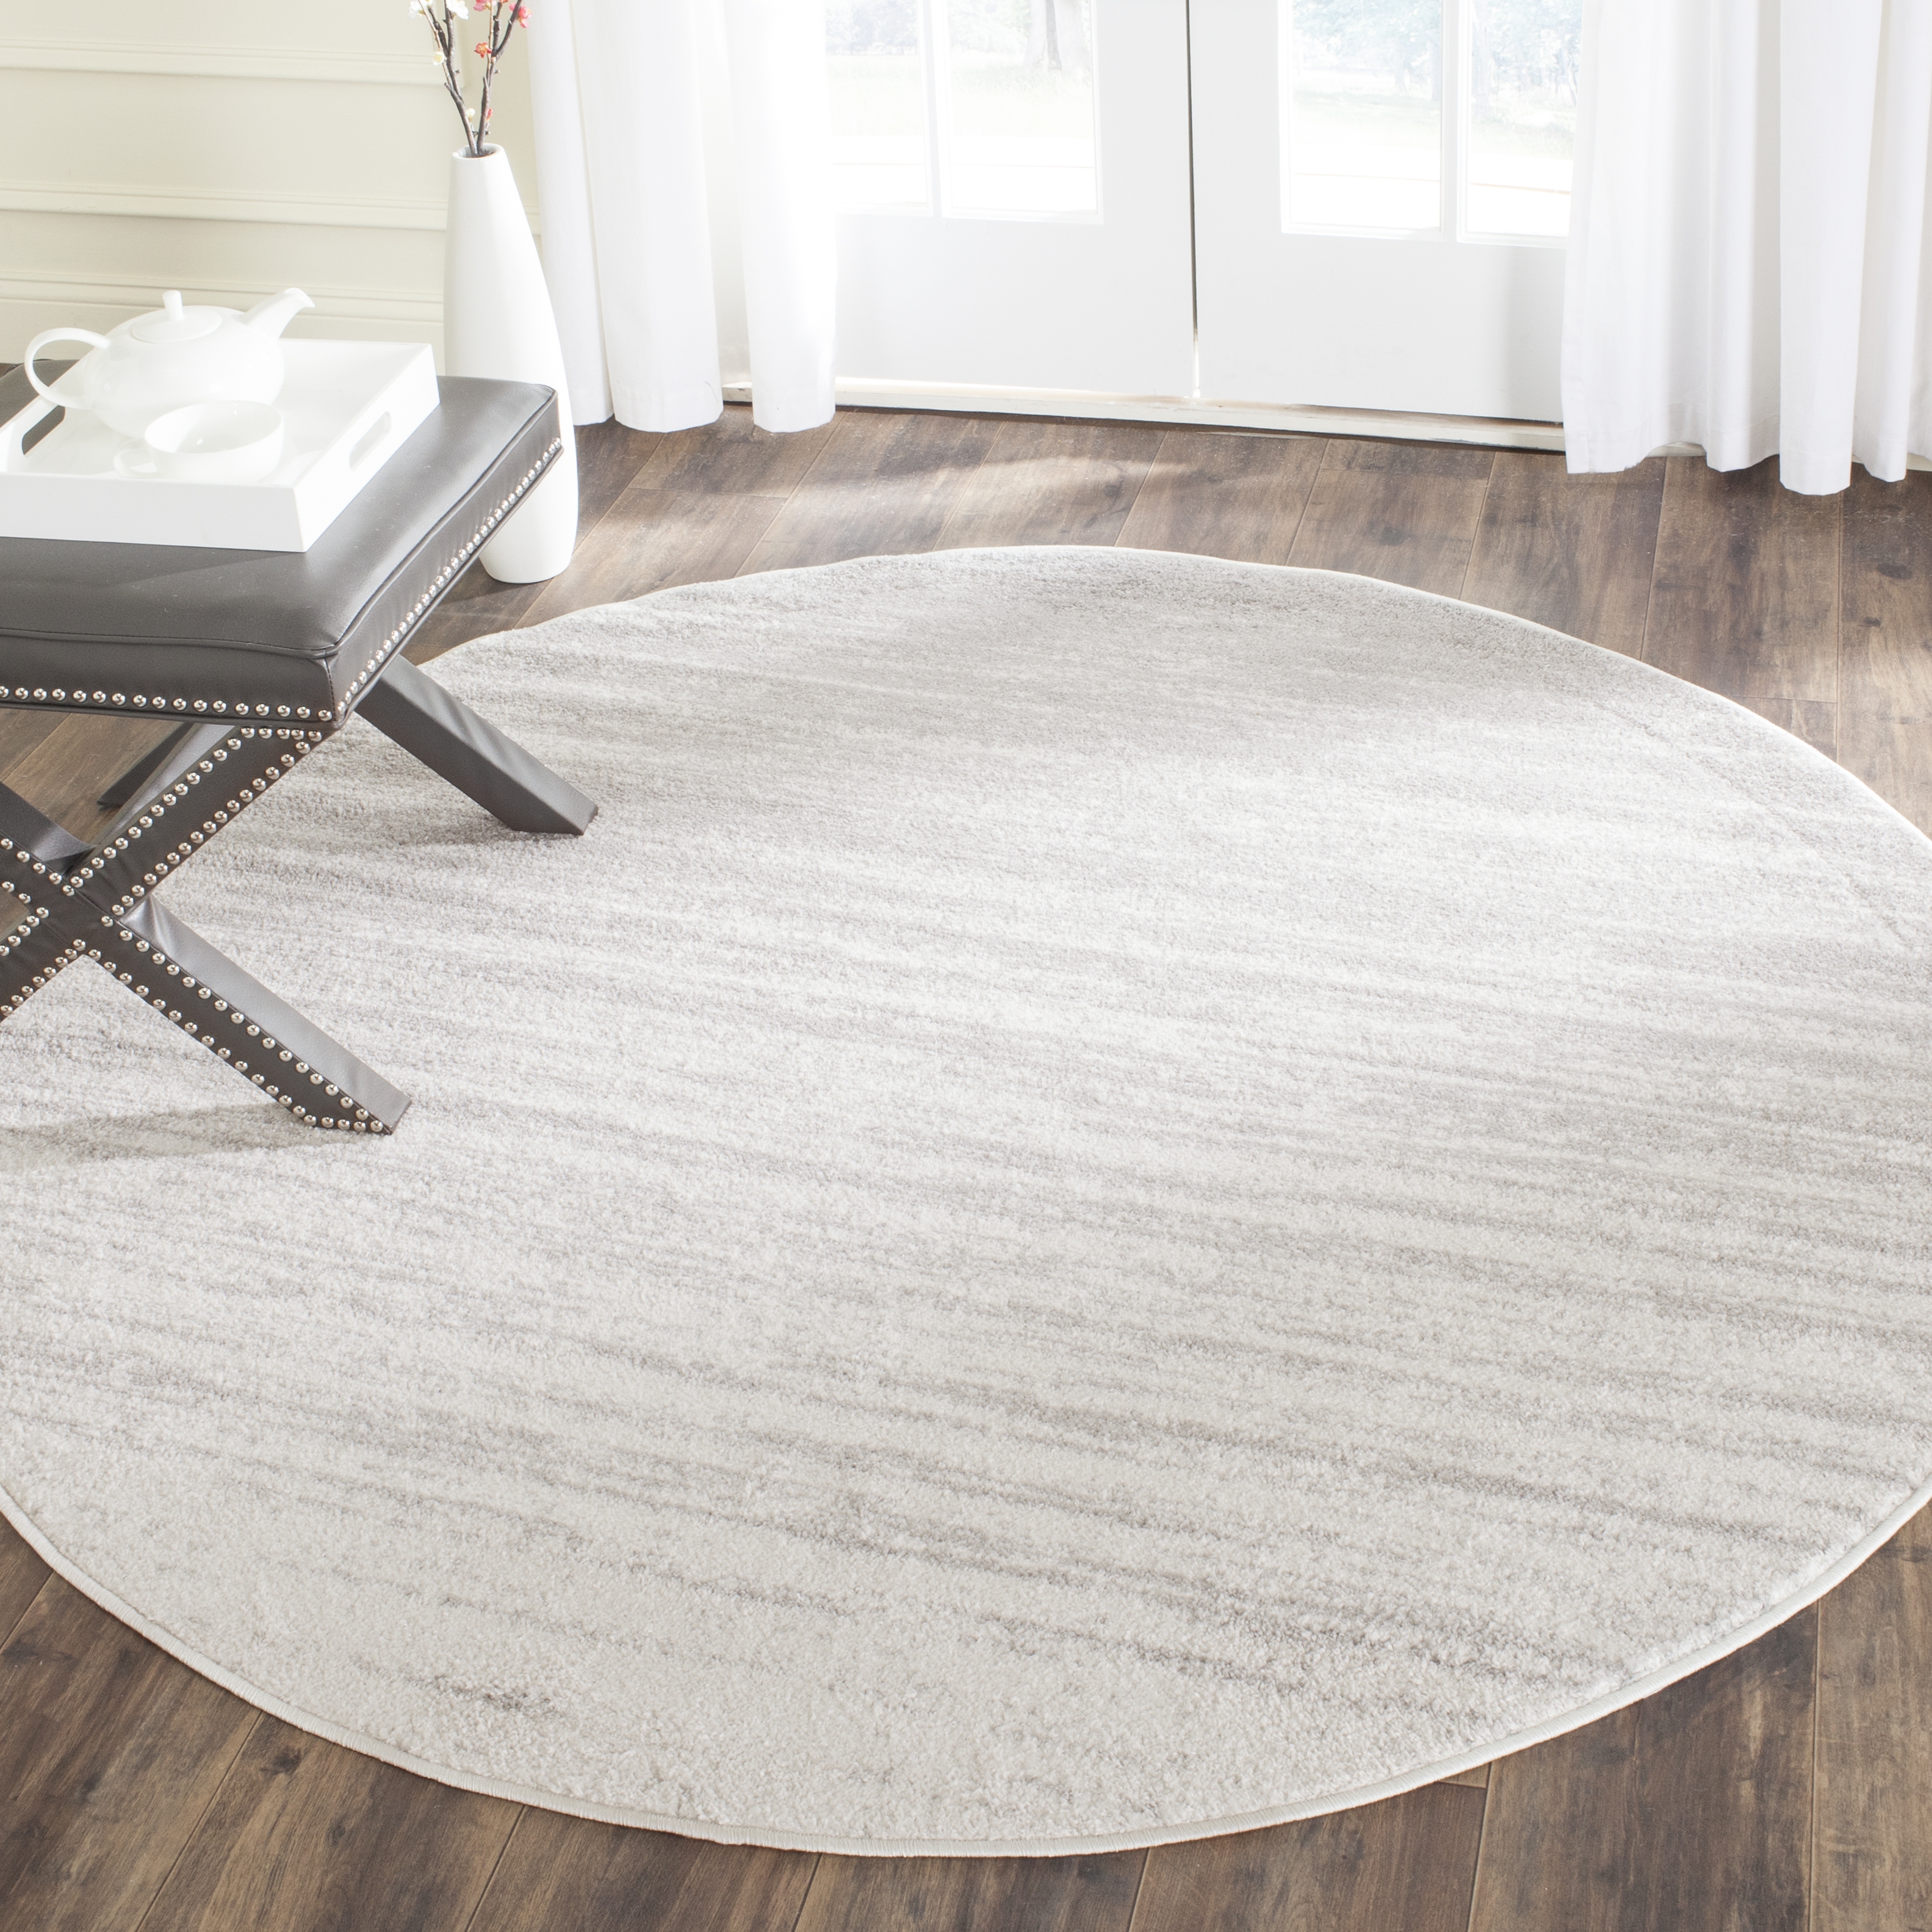 Arlo Home Woven Area Rug, ADR113B, Ivory/Silver,  5' X 5' Round - Image 1